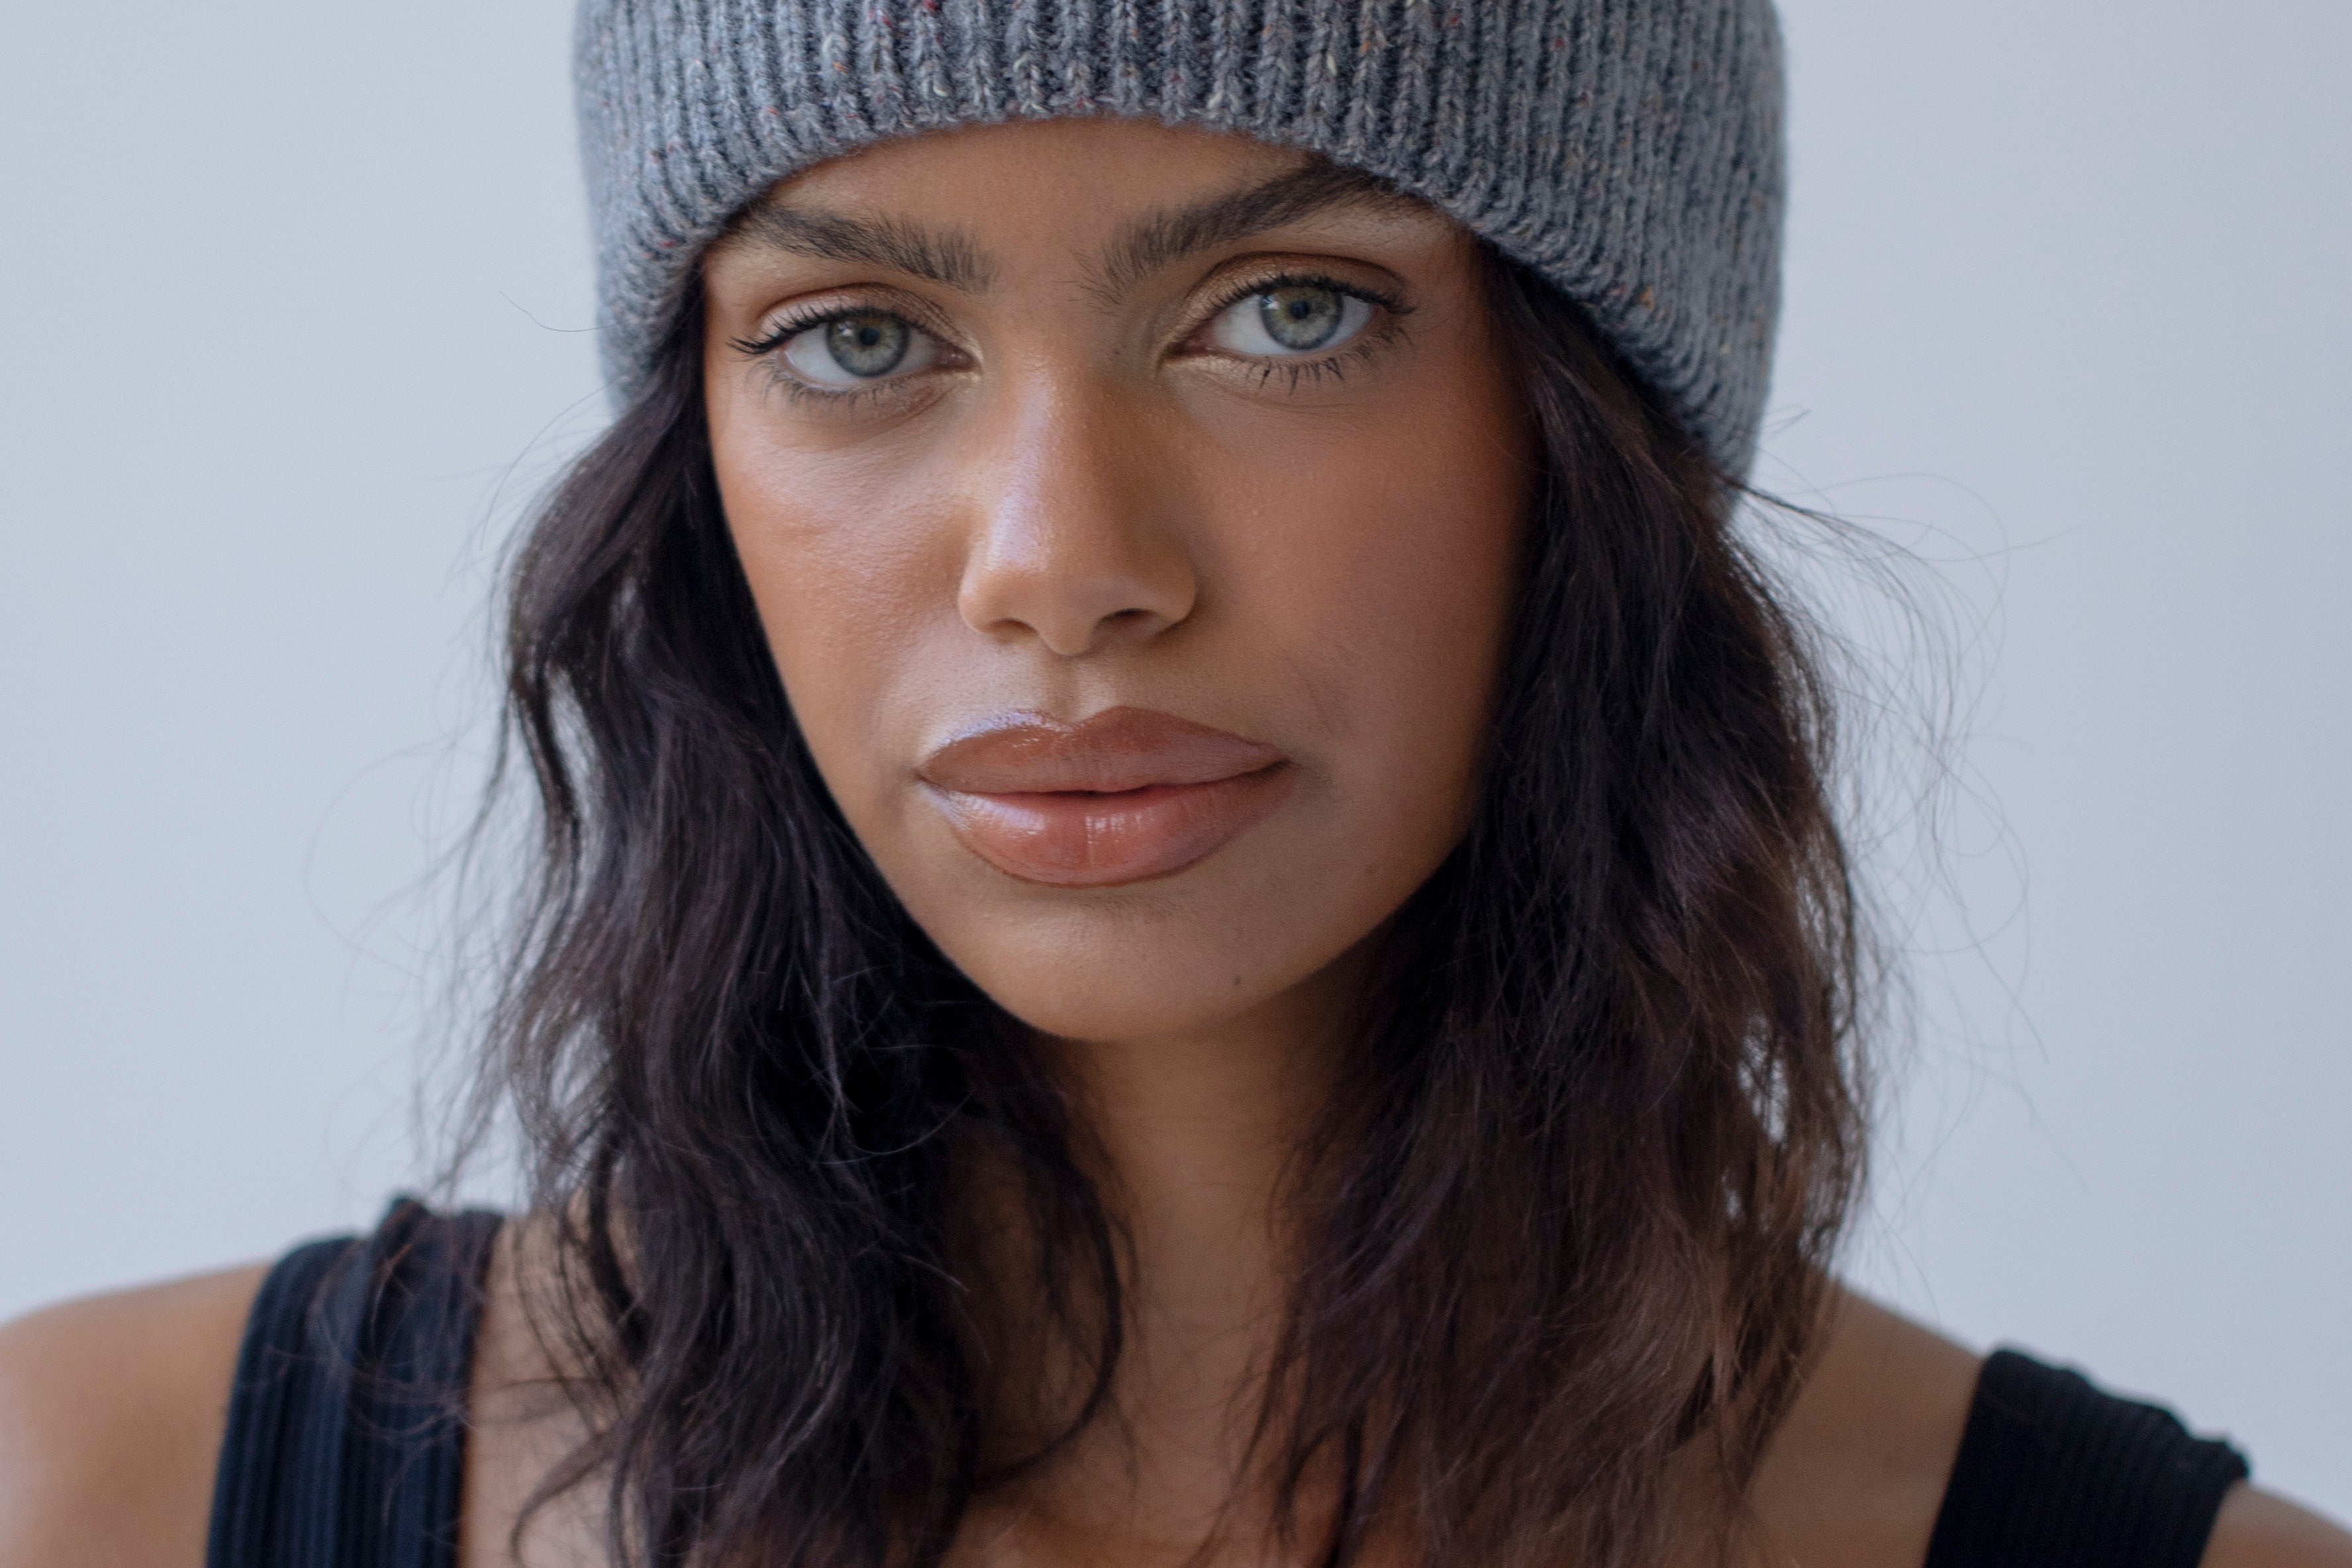 The Embroidered Beanie